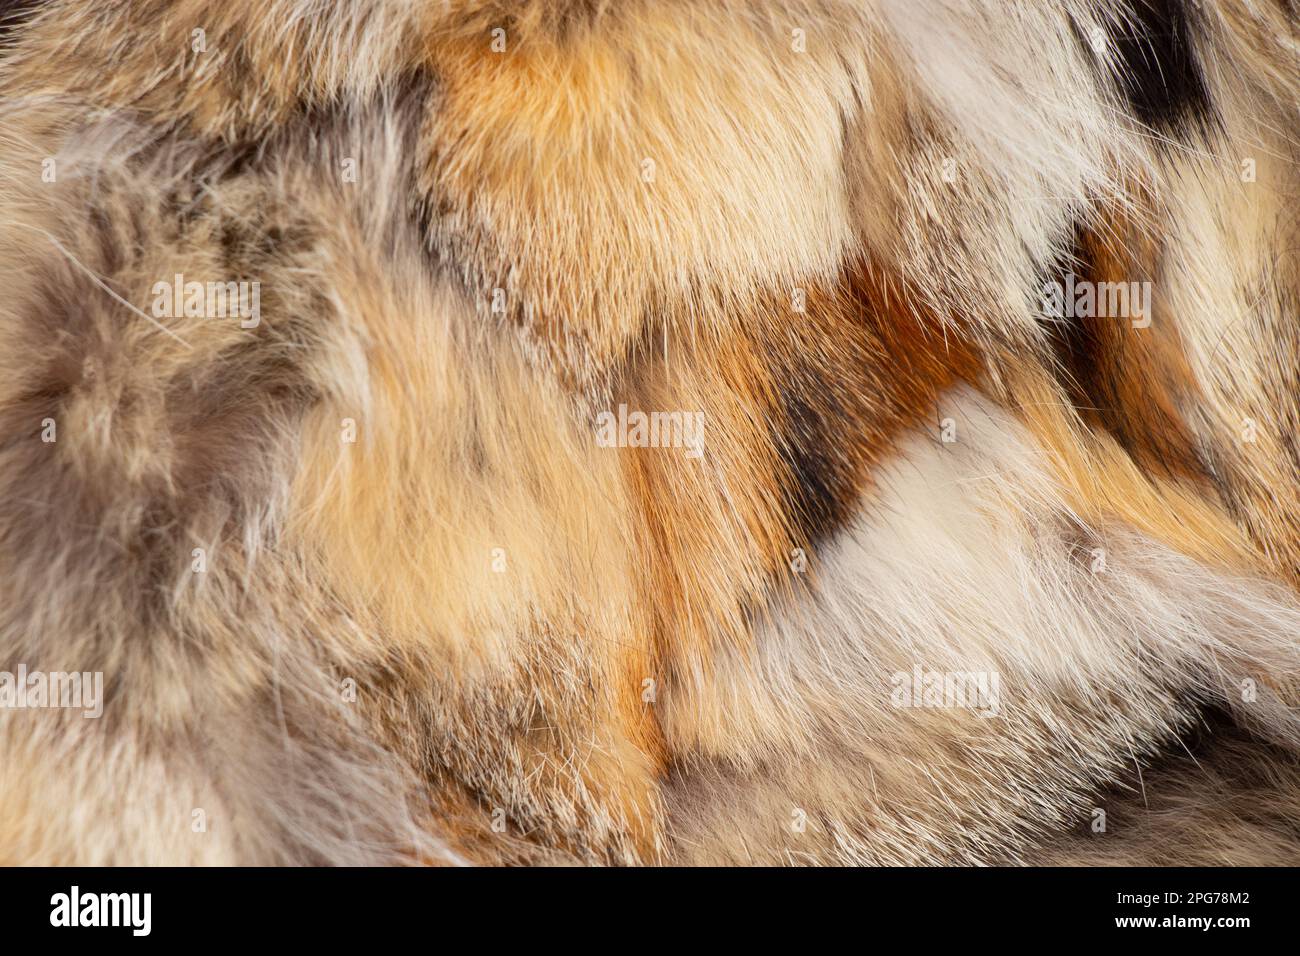 real fur close up as background Stock Photo